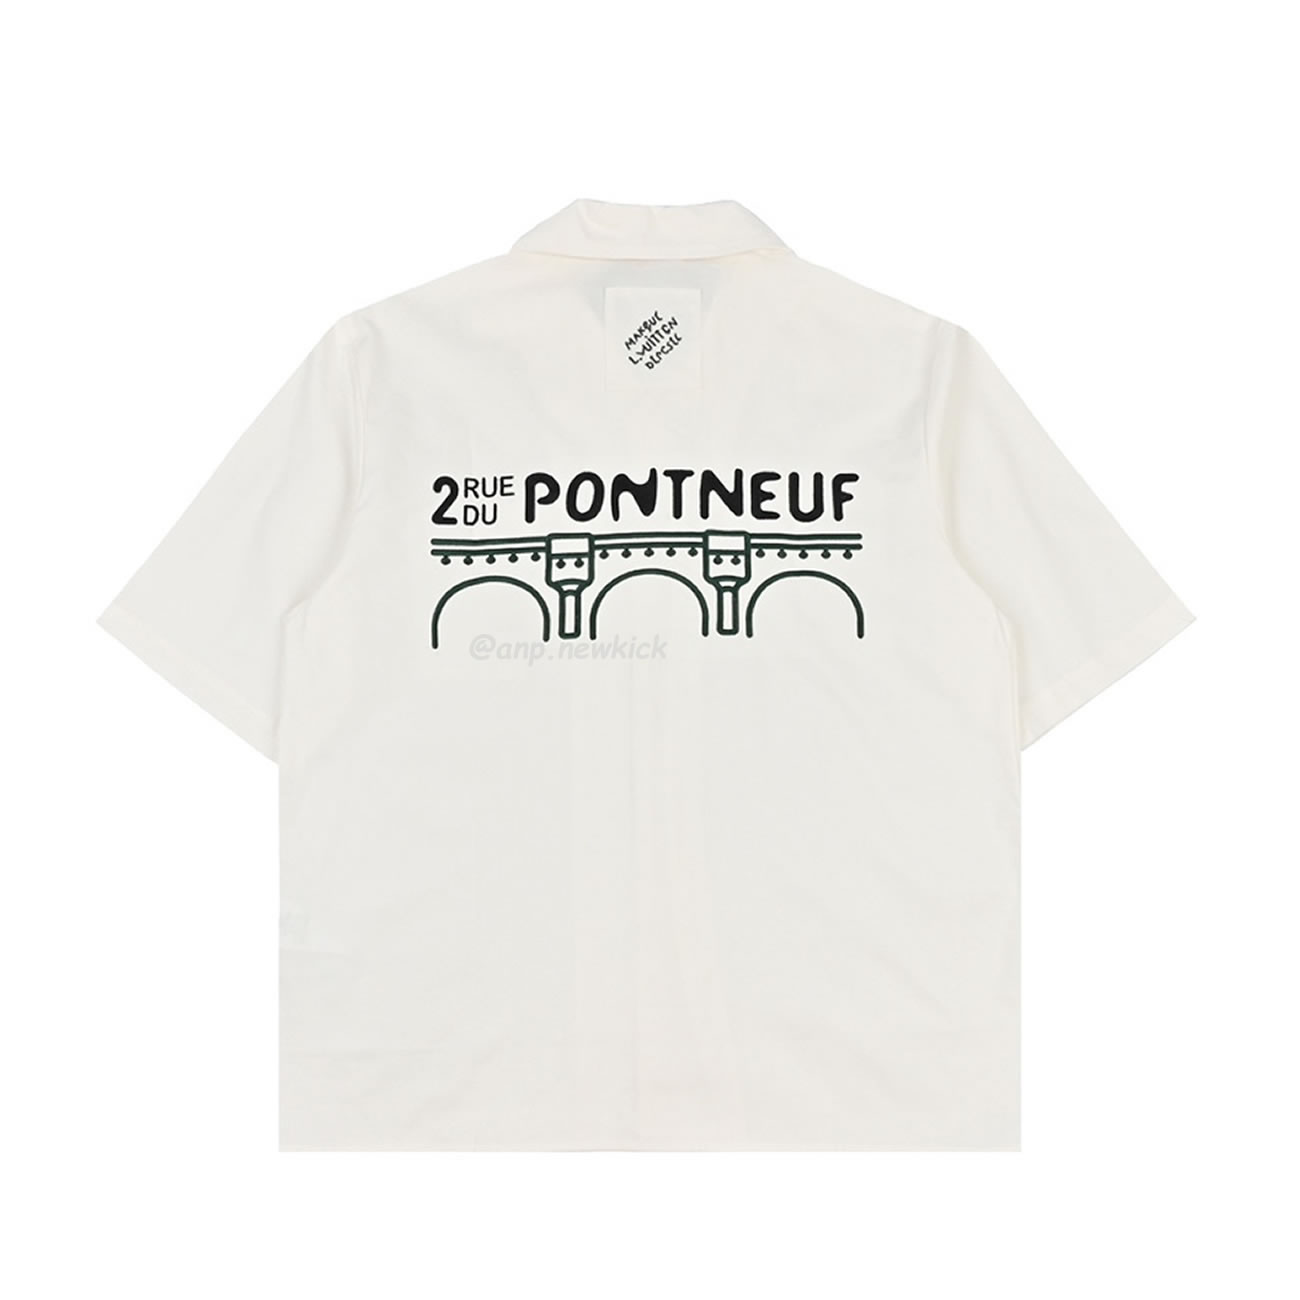 Louis Vuitton 1v 24ss Embroidered Short Sleeved Shirts On The Banks Of The Bridge Seine River Flower (8) - newkick.org